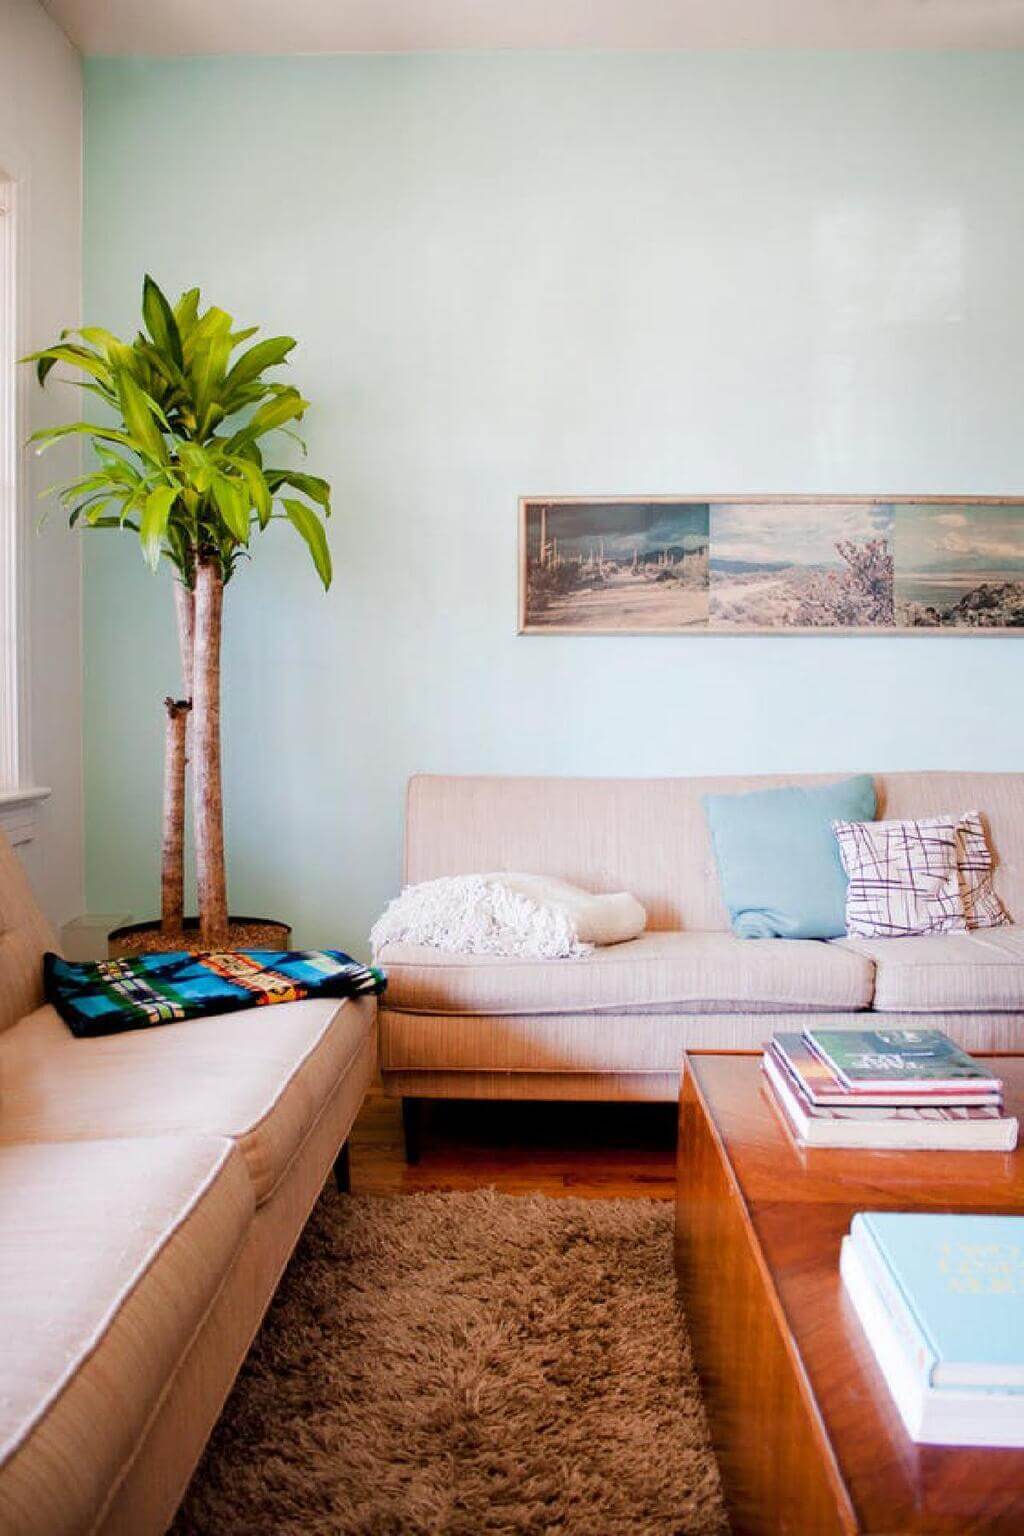 A living room with a couch, coffee table and a potted plant
